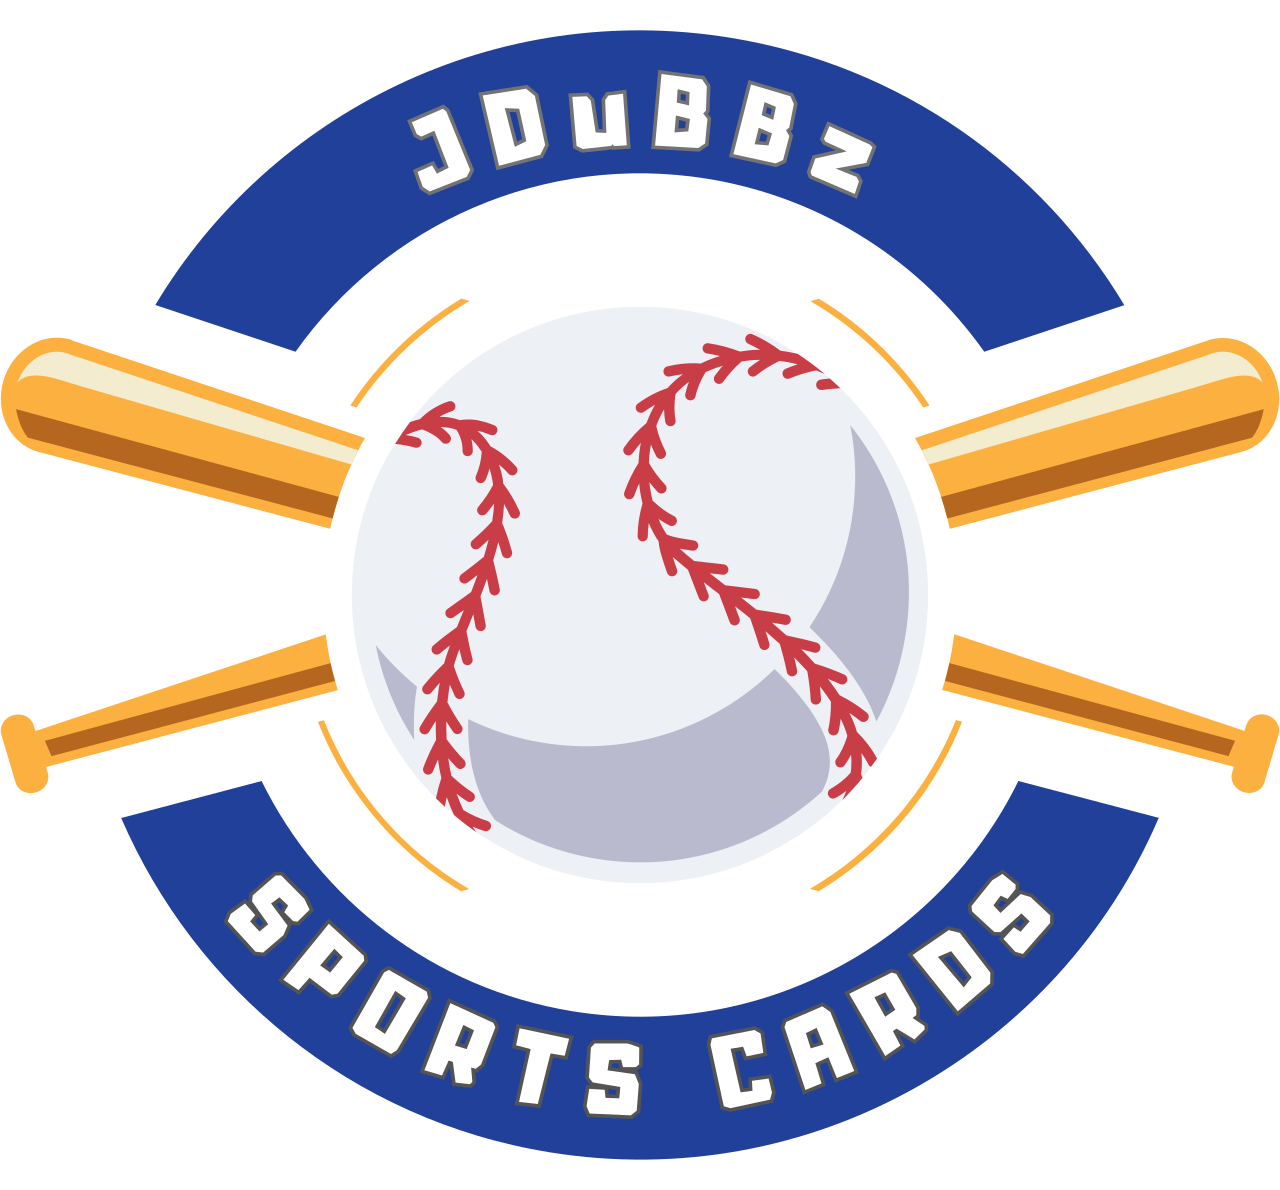 SPORTS CARDS's logo